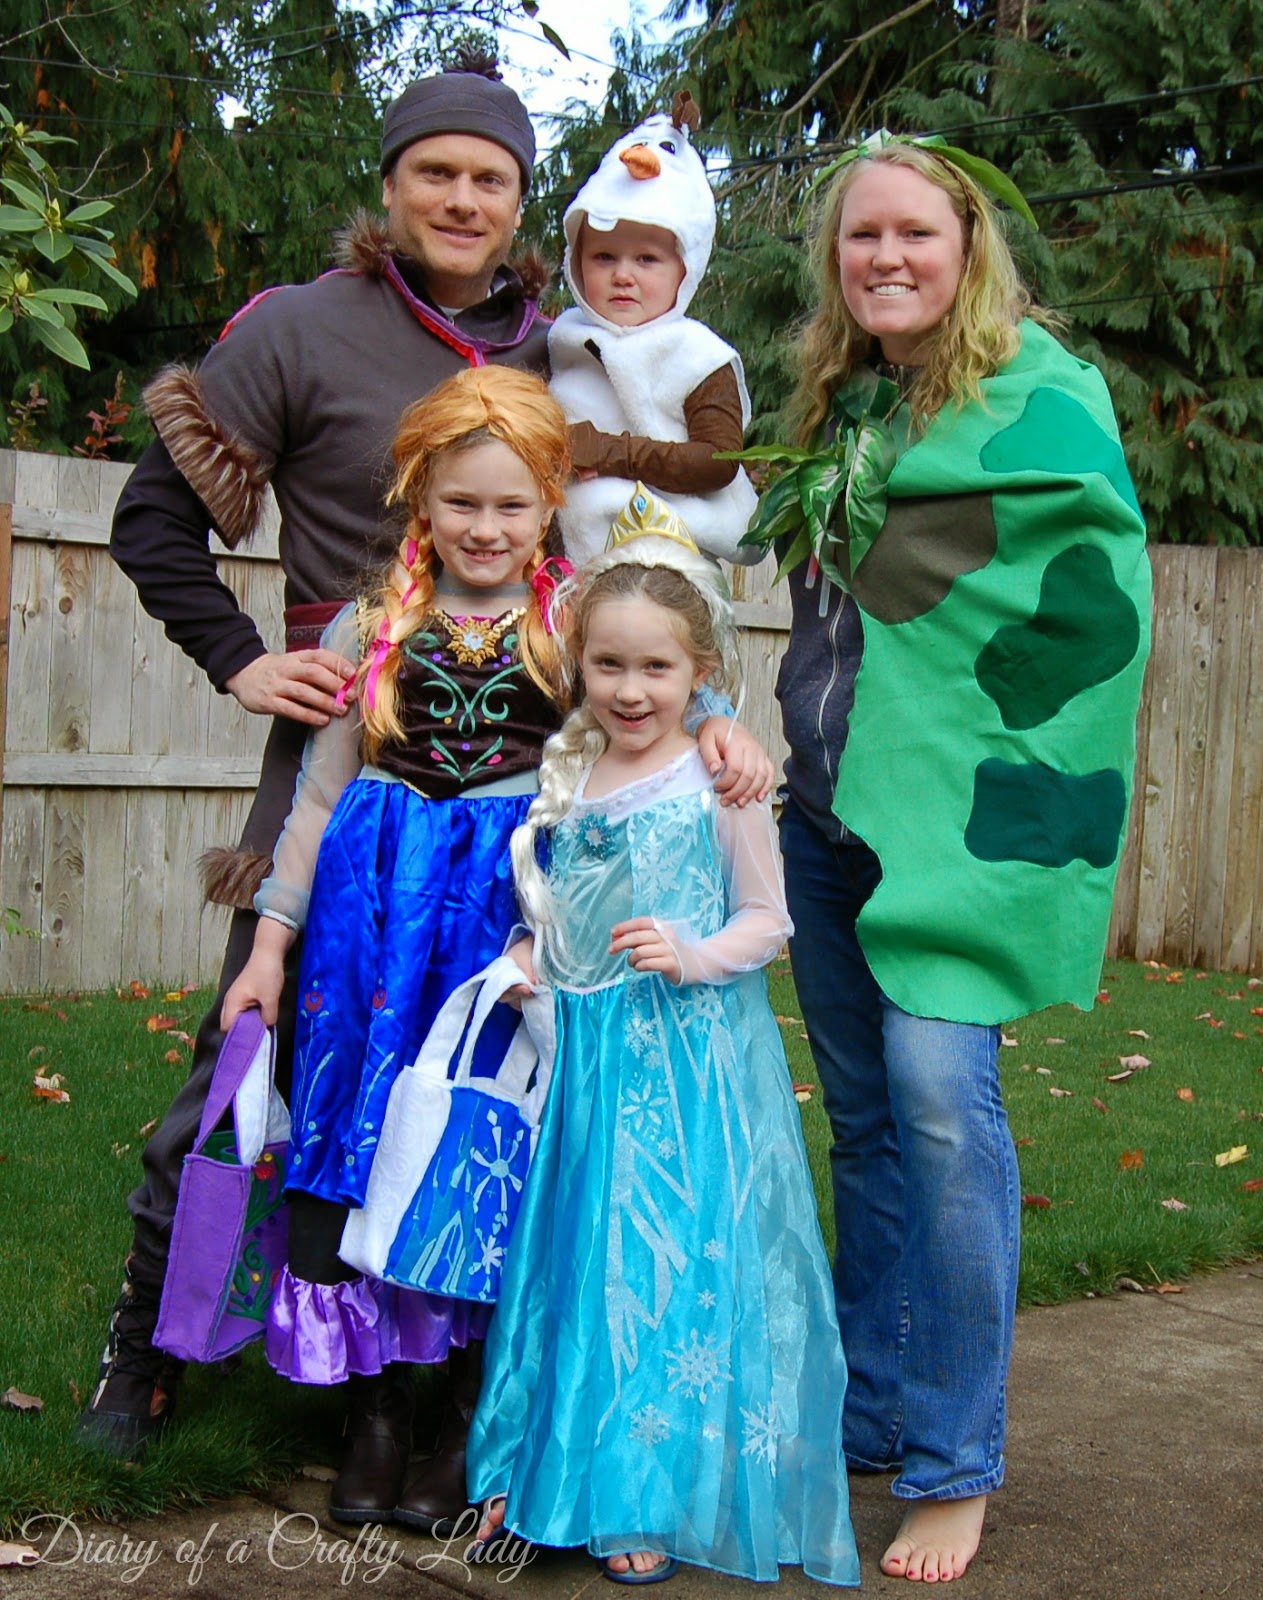 Diary of a Crafty Lady: Happy Halloween! From the Frozen Family 2014